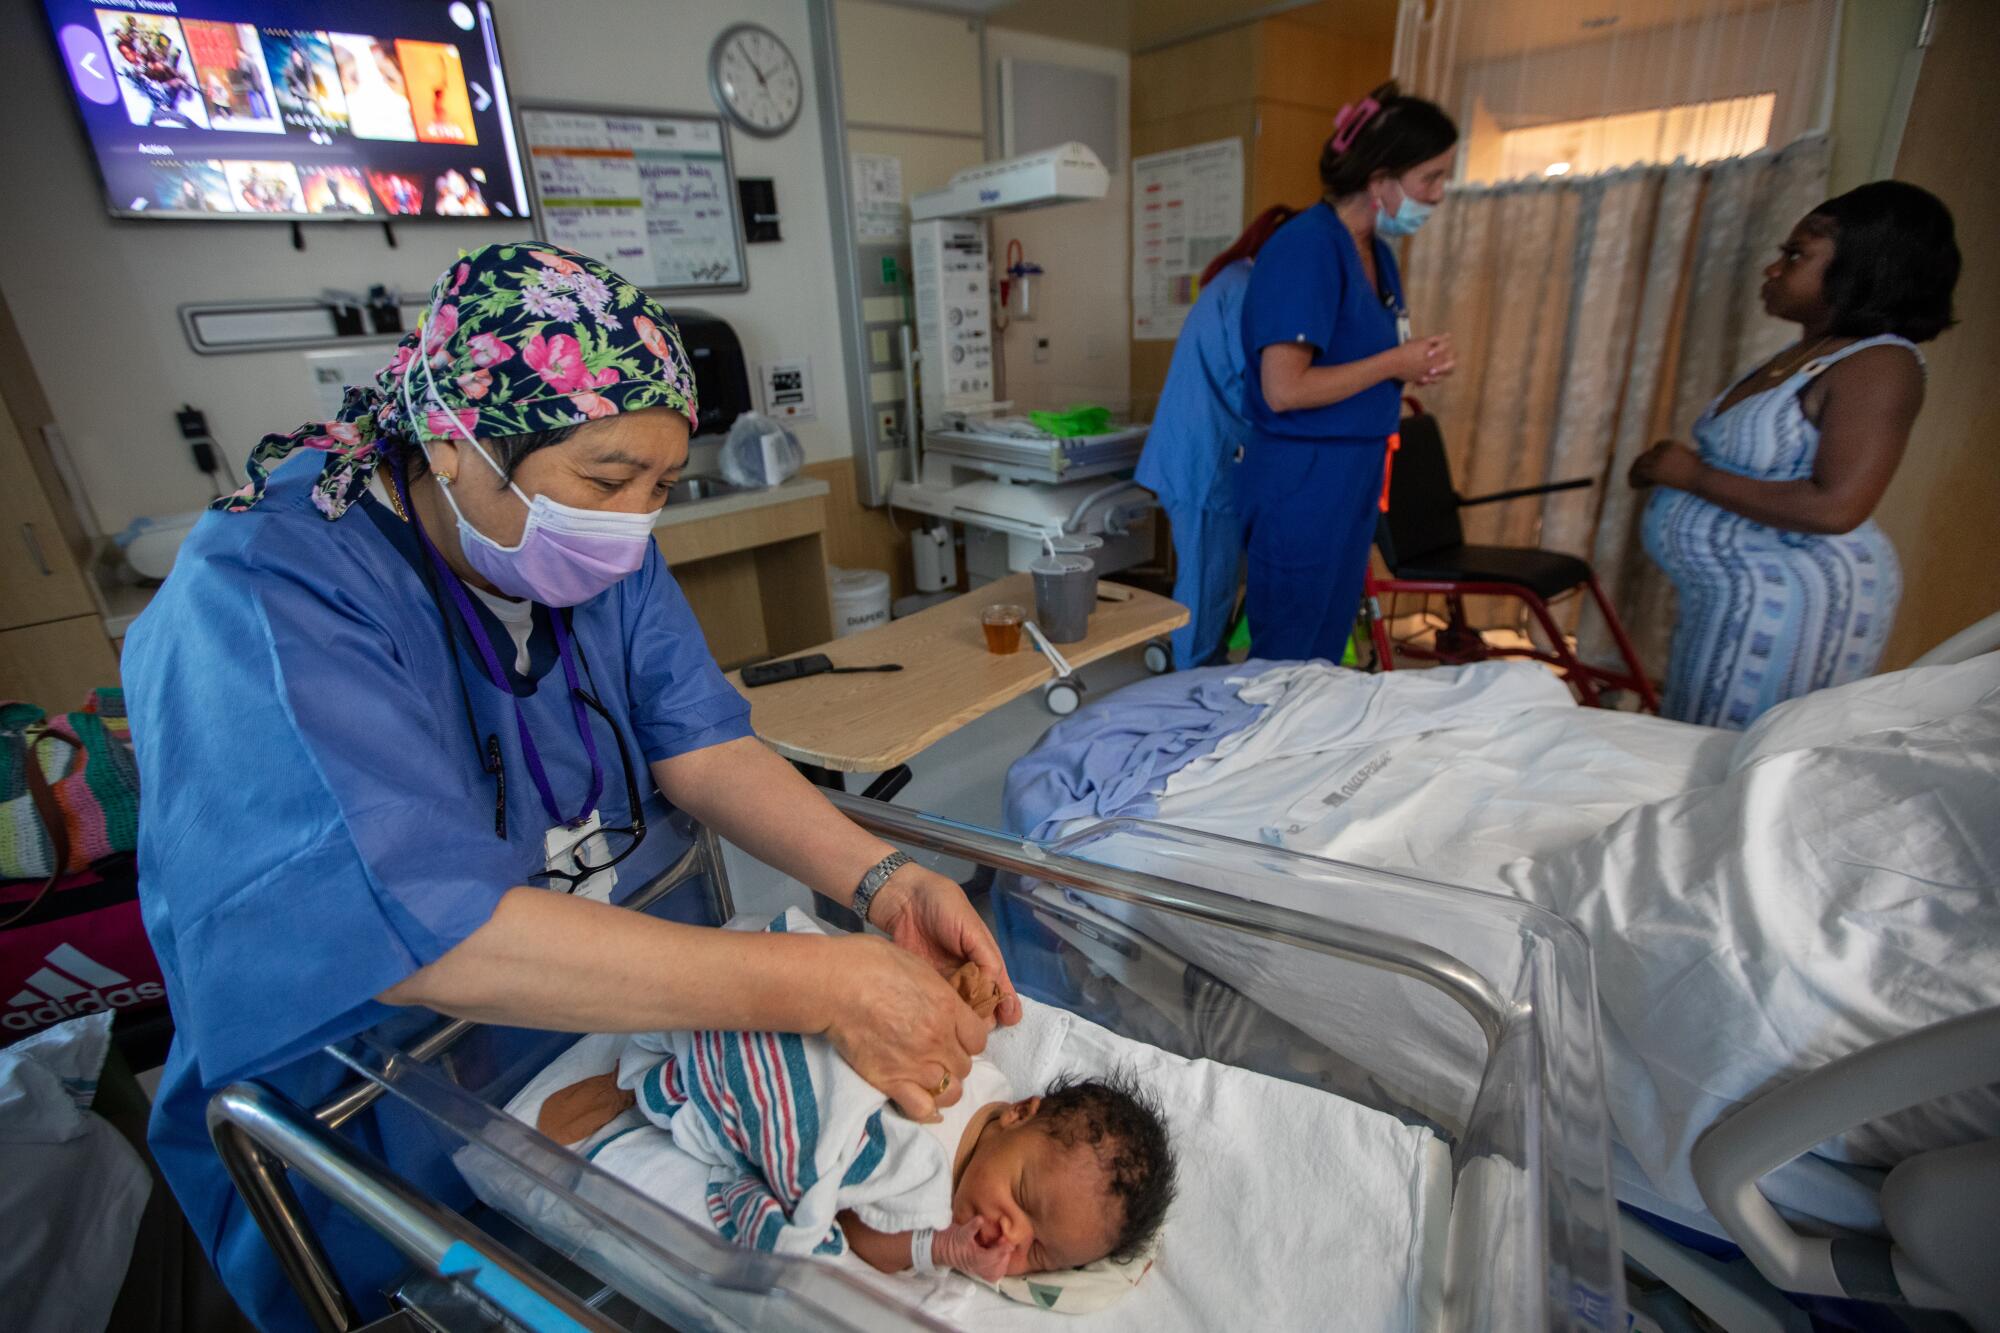 A nurse wraps a baby in a blanket as another speaks to a woman in the background.